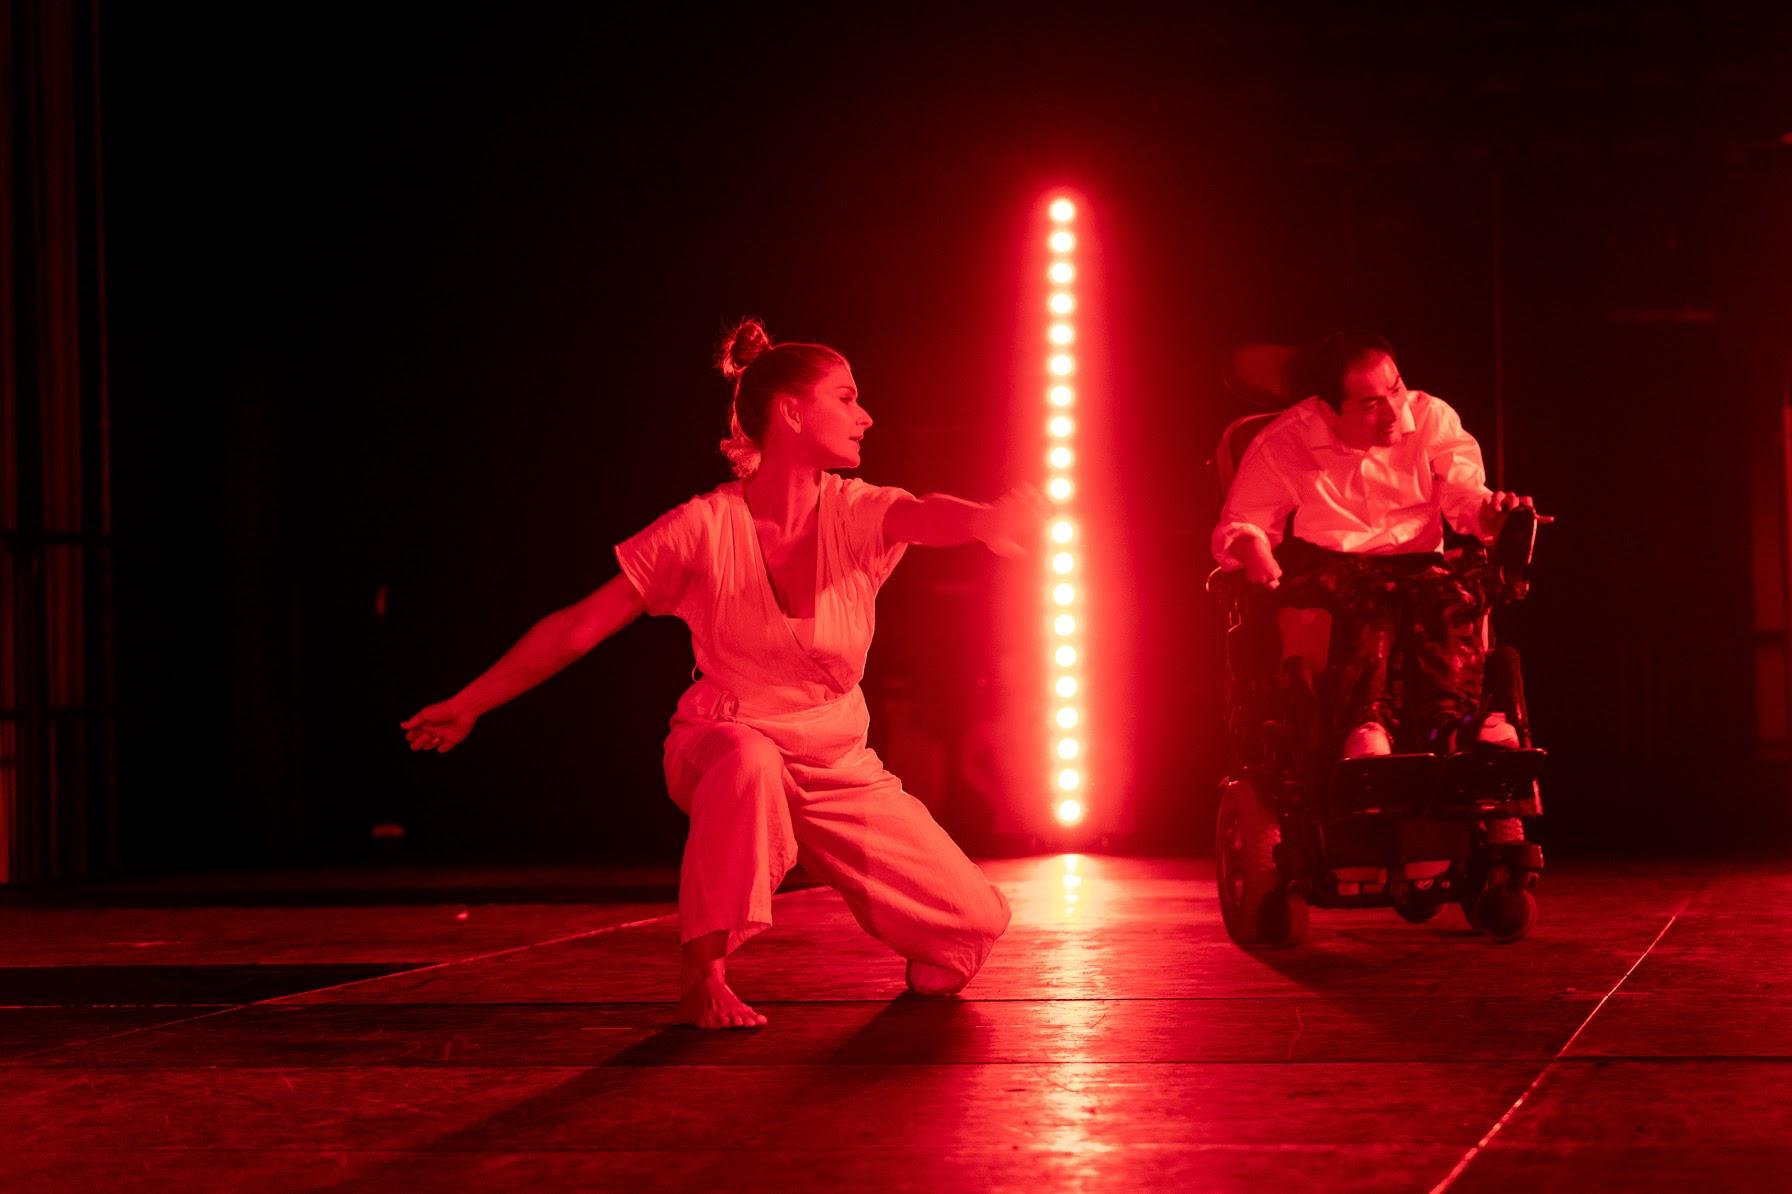 East Meets West is an on-stage interactive performance between visual artist, Yung Chen, and dancer, Julie van Renen for Chinese New Year, as part of Wellington Chinese New Year Festival 2019.